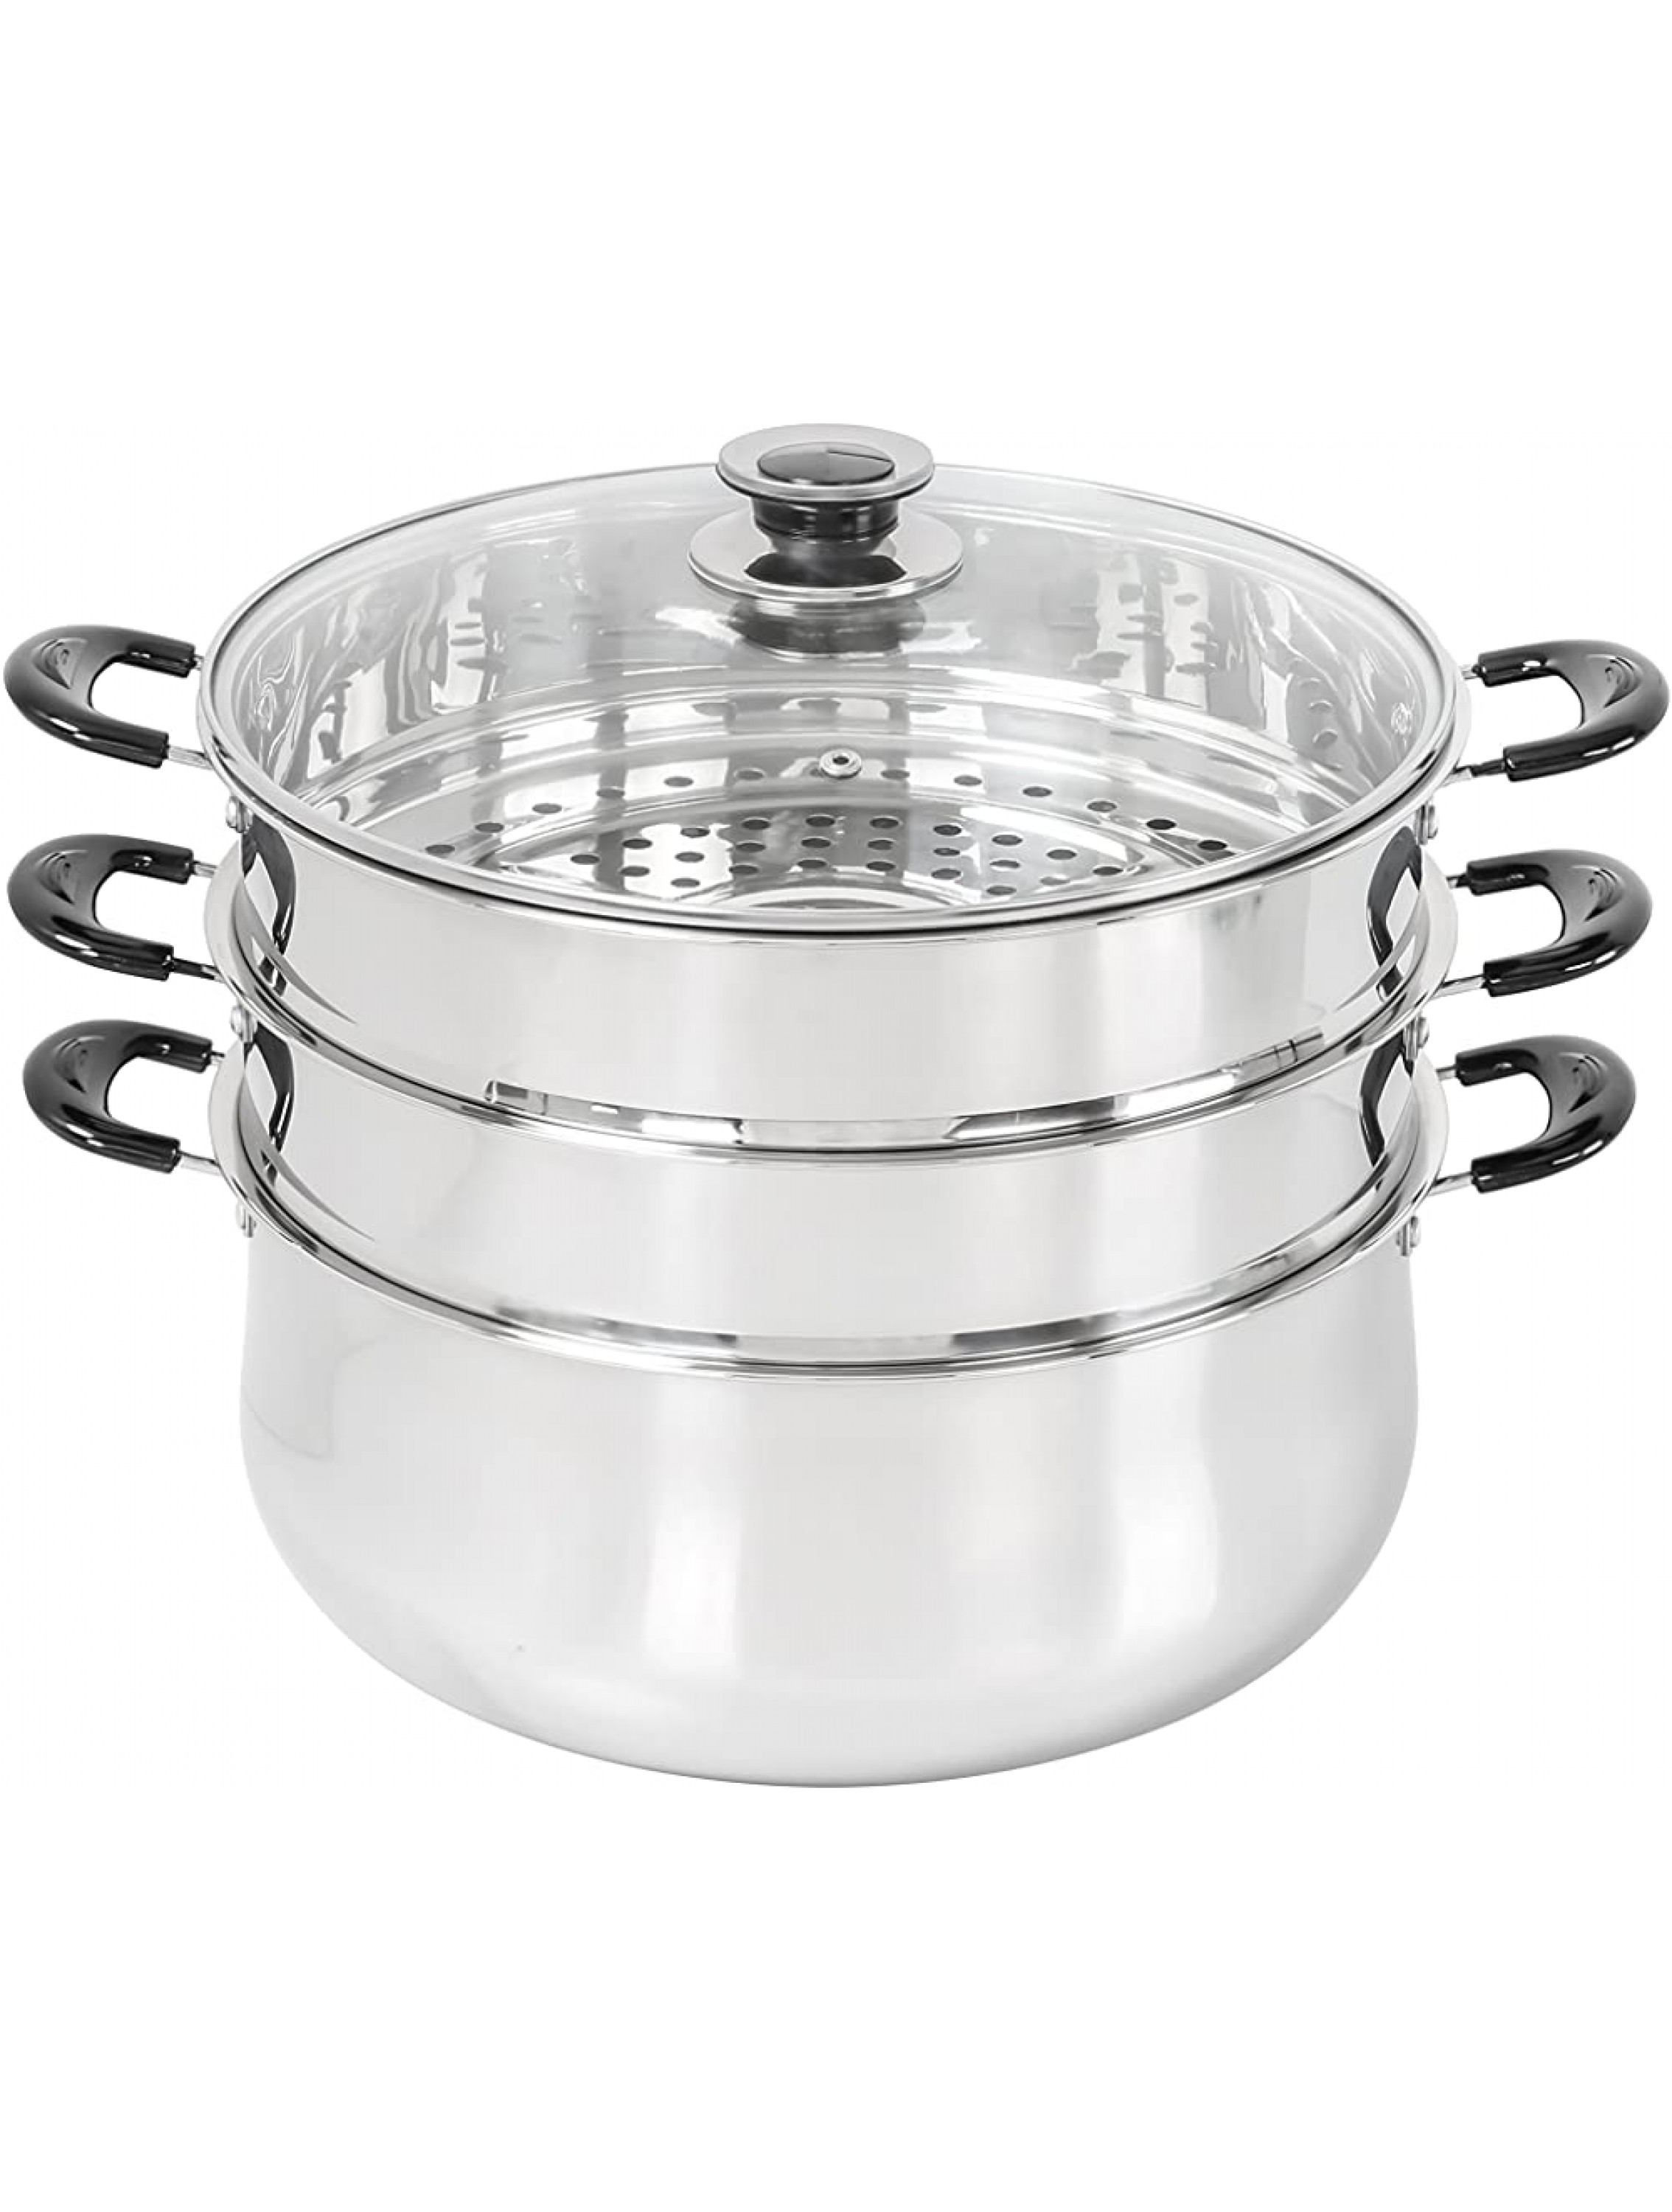 Concord 30 CM Stainless Steel 3 Tier Steamer Pot Steaming Cookware Triply Bottom - B3RWV0X0K